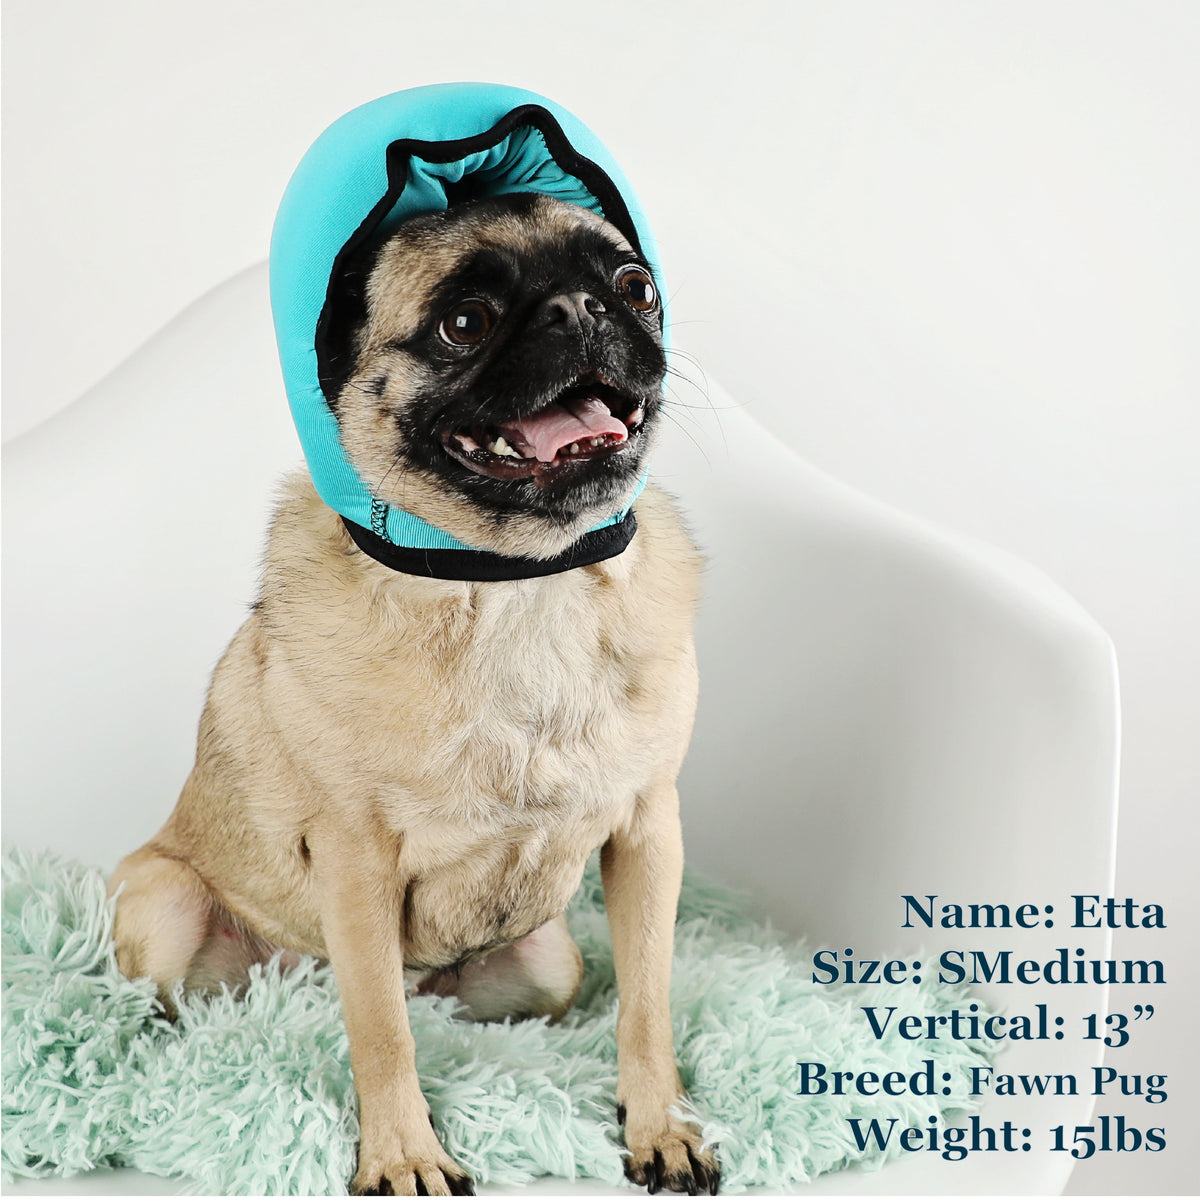 Etta is a Pug in a SMedium Blue PAWNIX Noise Cancelling Headset for dogs